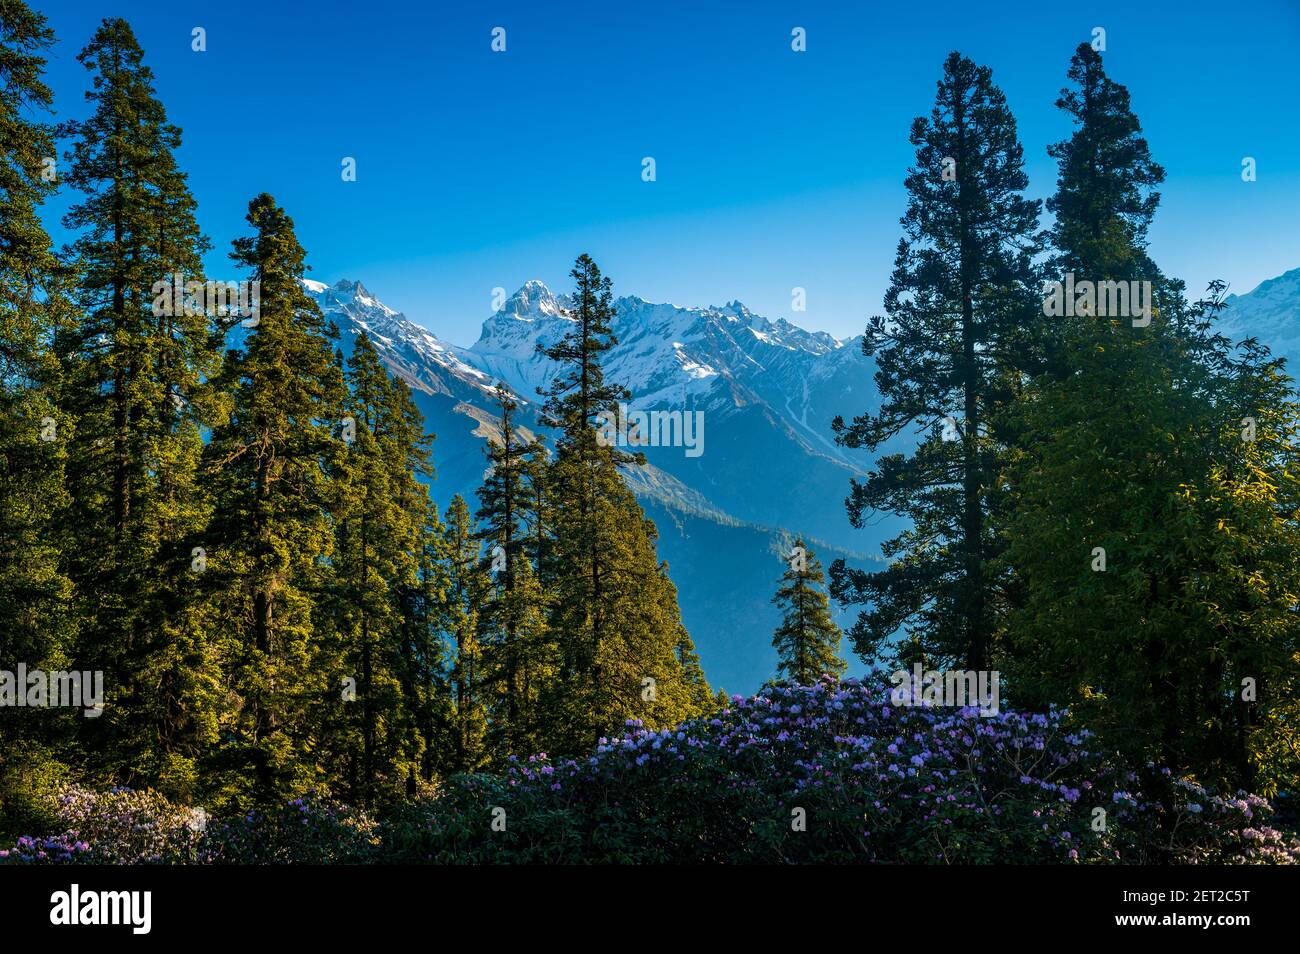 Spring rhododendrons and Himalayan peak. View of Majestic Himalayan mountains in Parvati Valley, Himachal Pradesh, India. Stock Photo